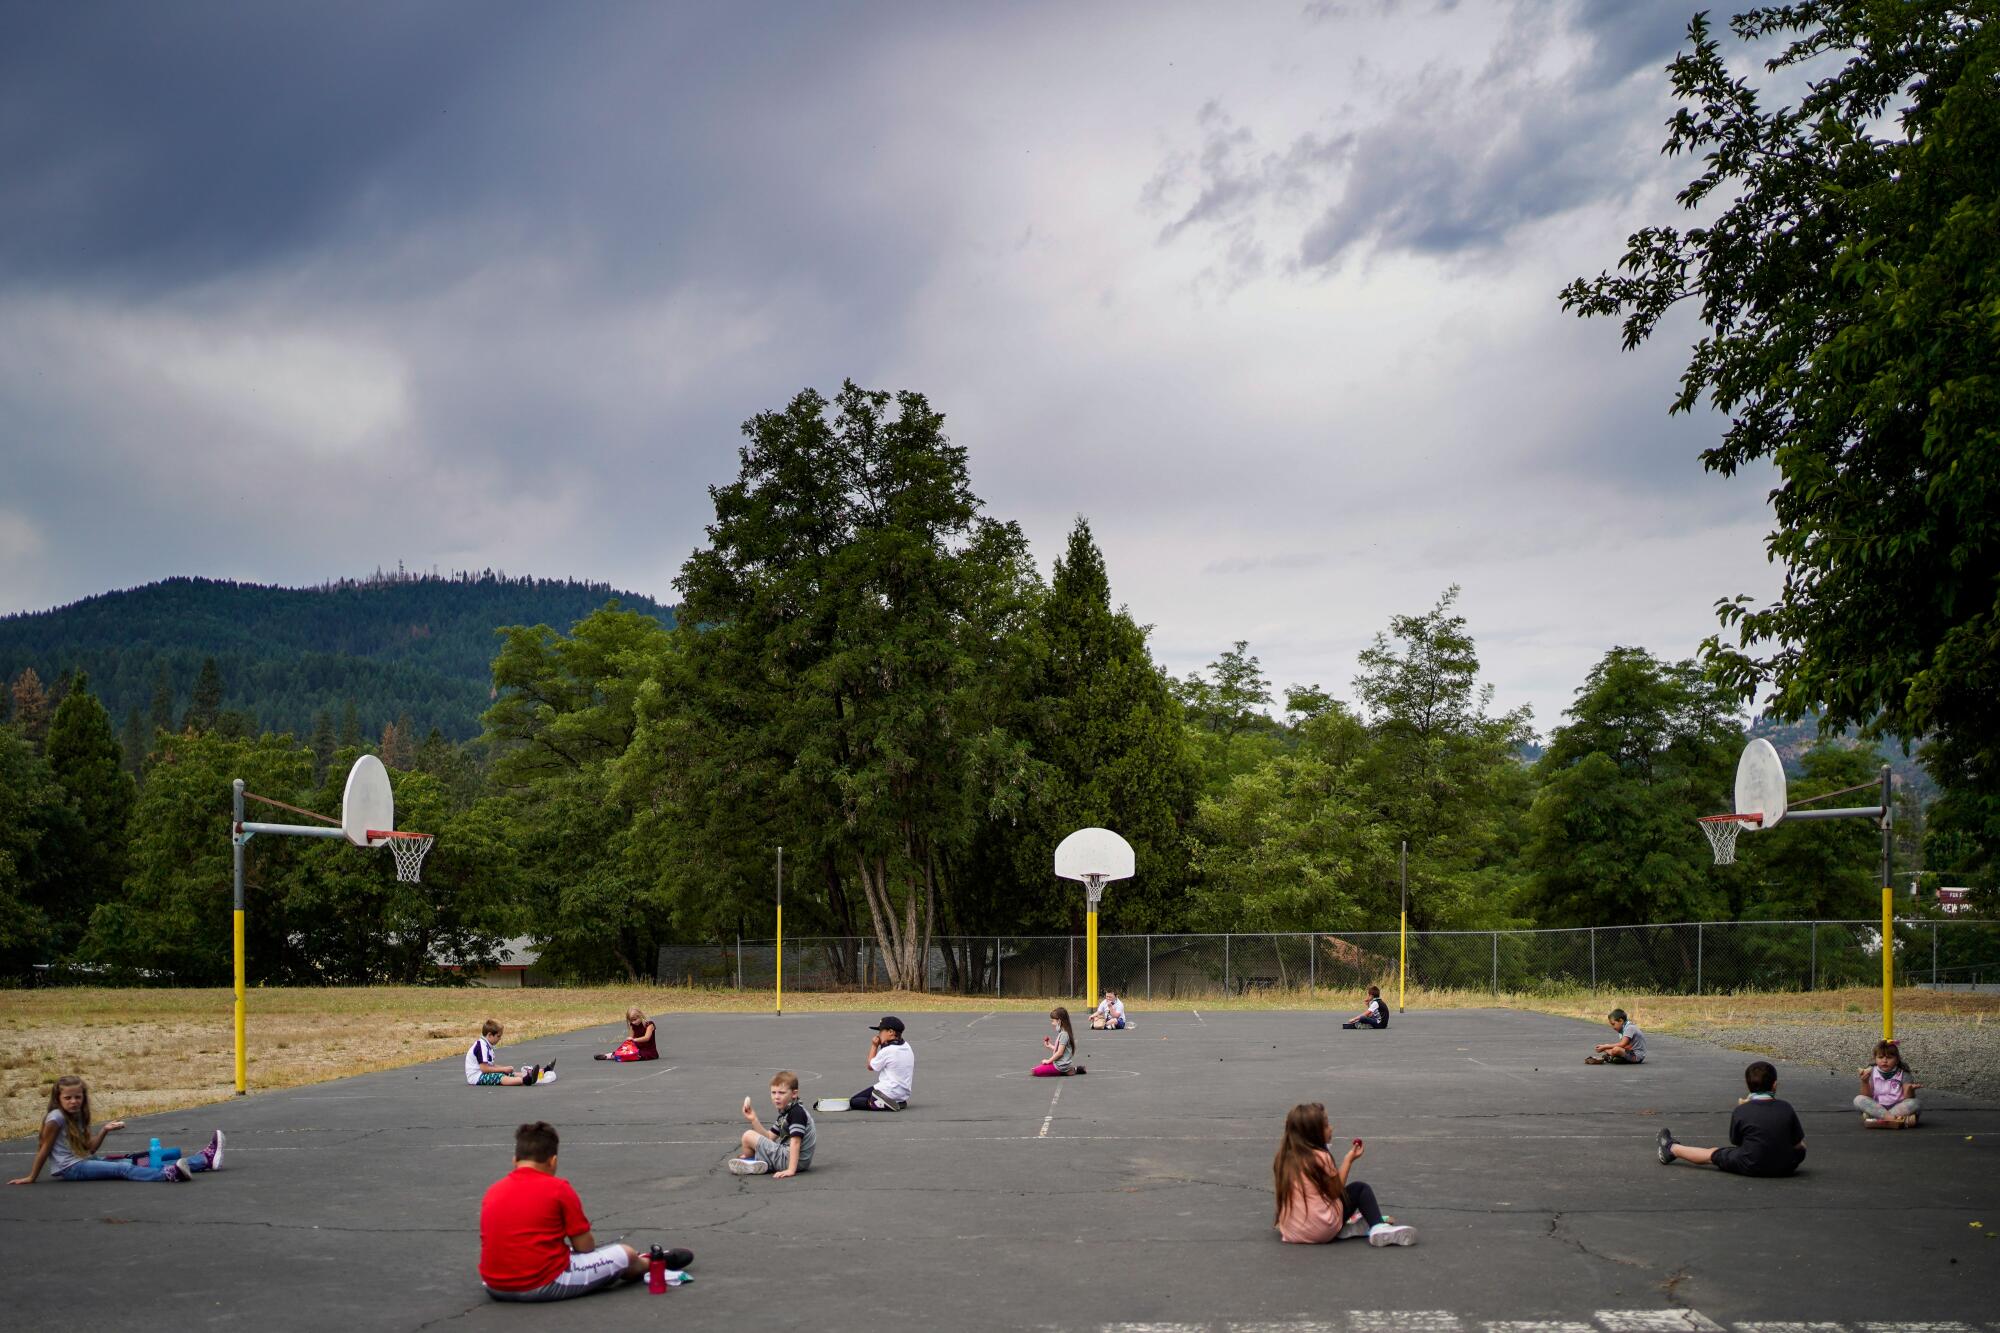 Schoolchildren eat lunch while sitting on a blacktop basketball court surrounded by greenery and forested hills.